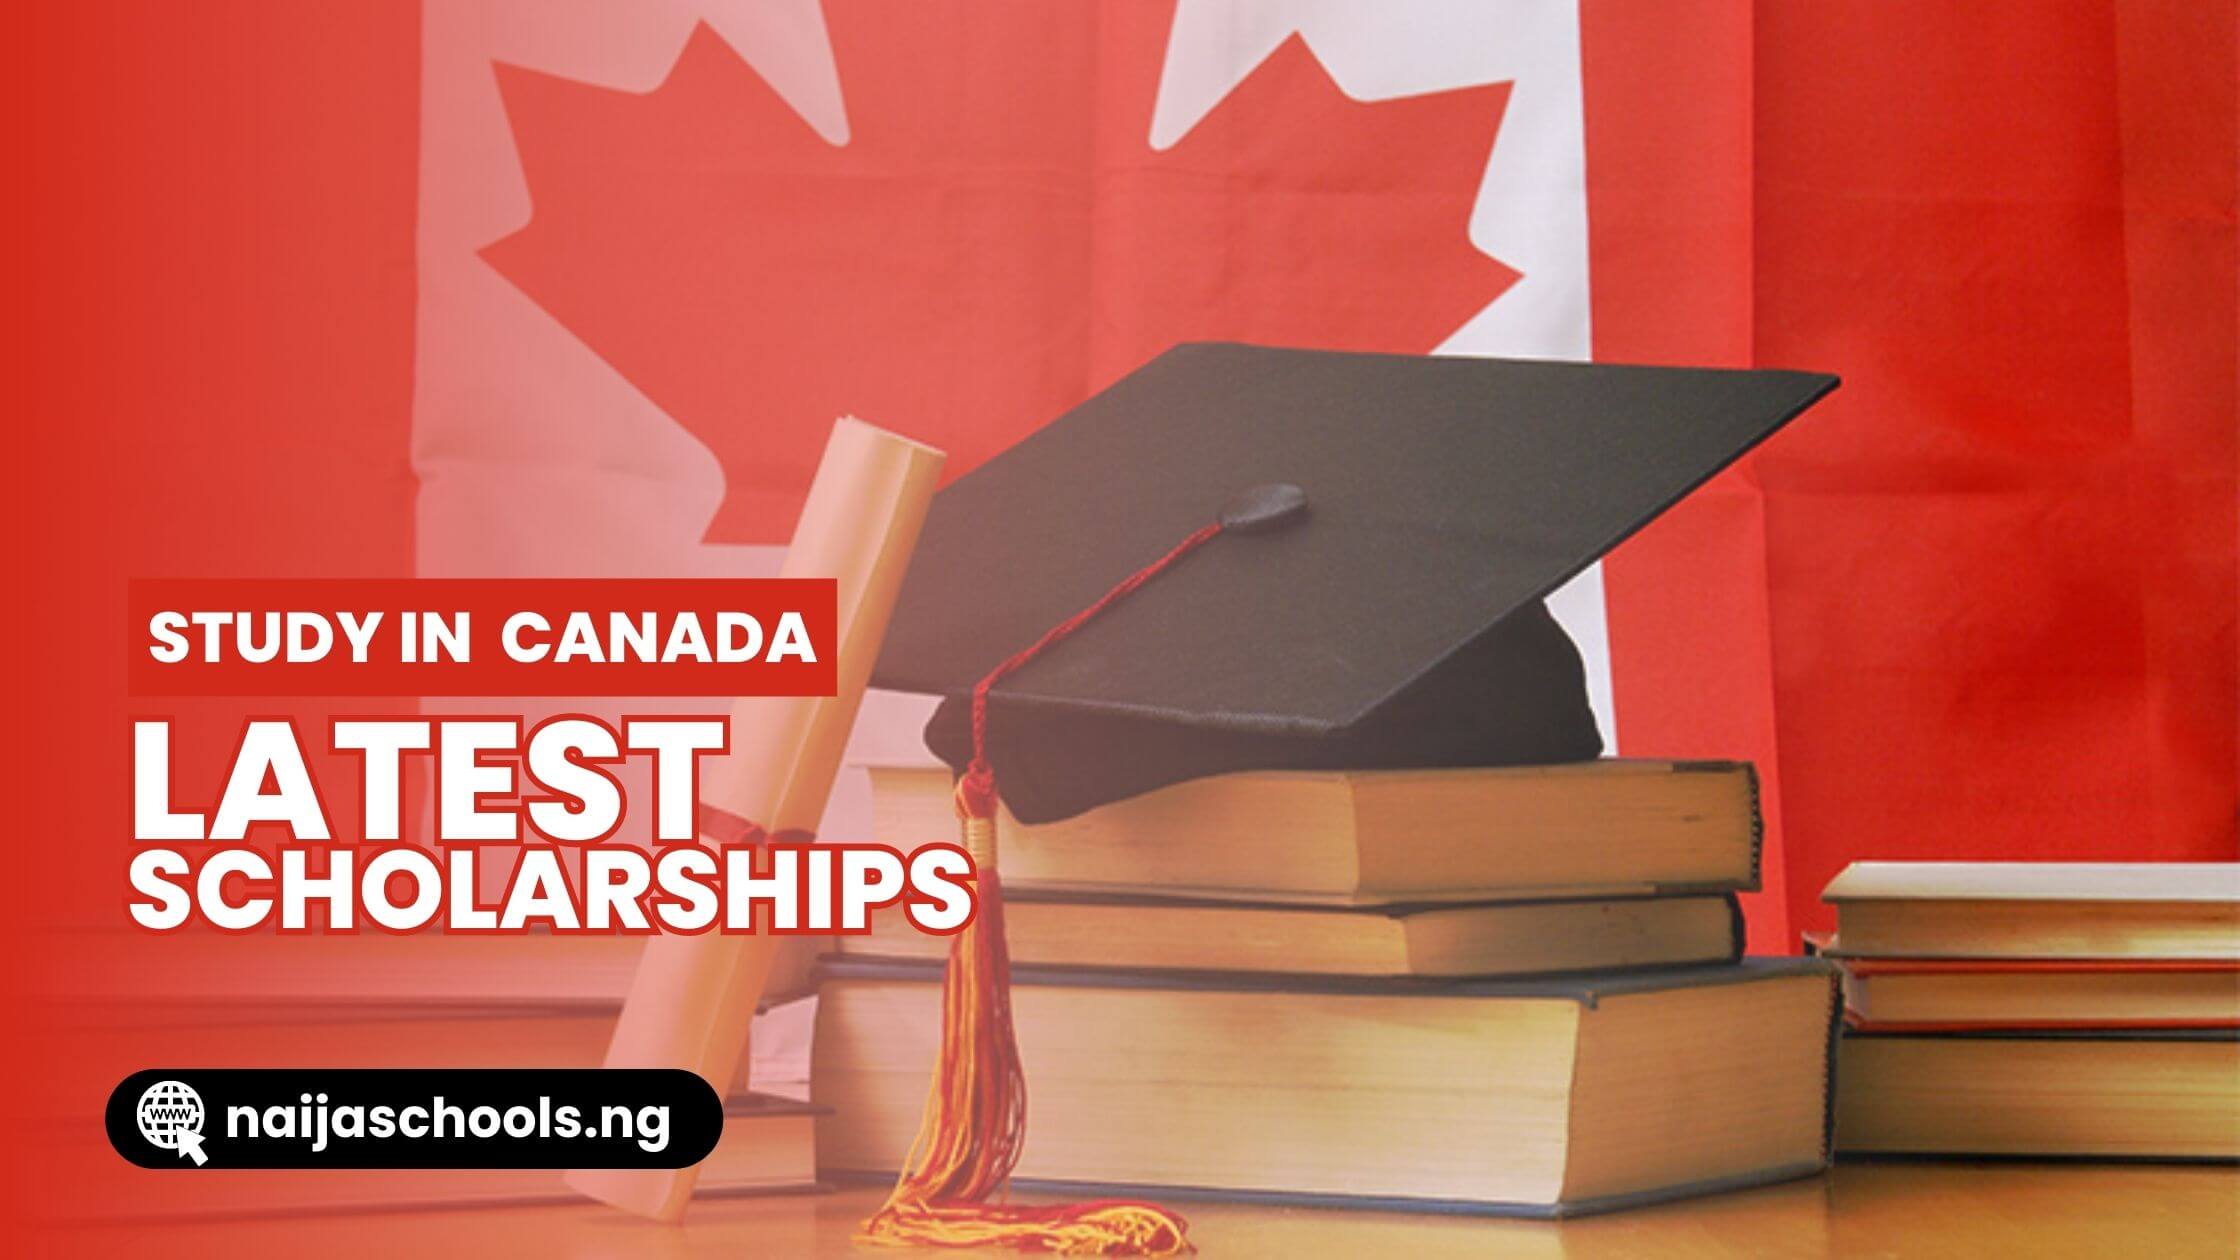 Study in Canada - Latest Scholarships